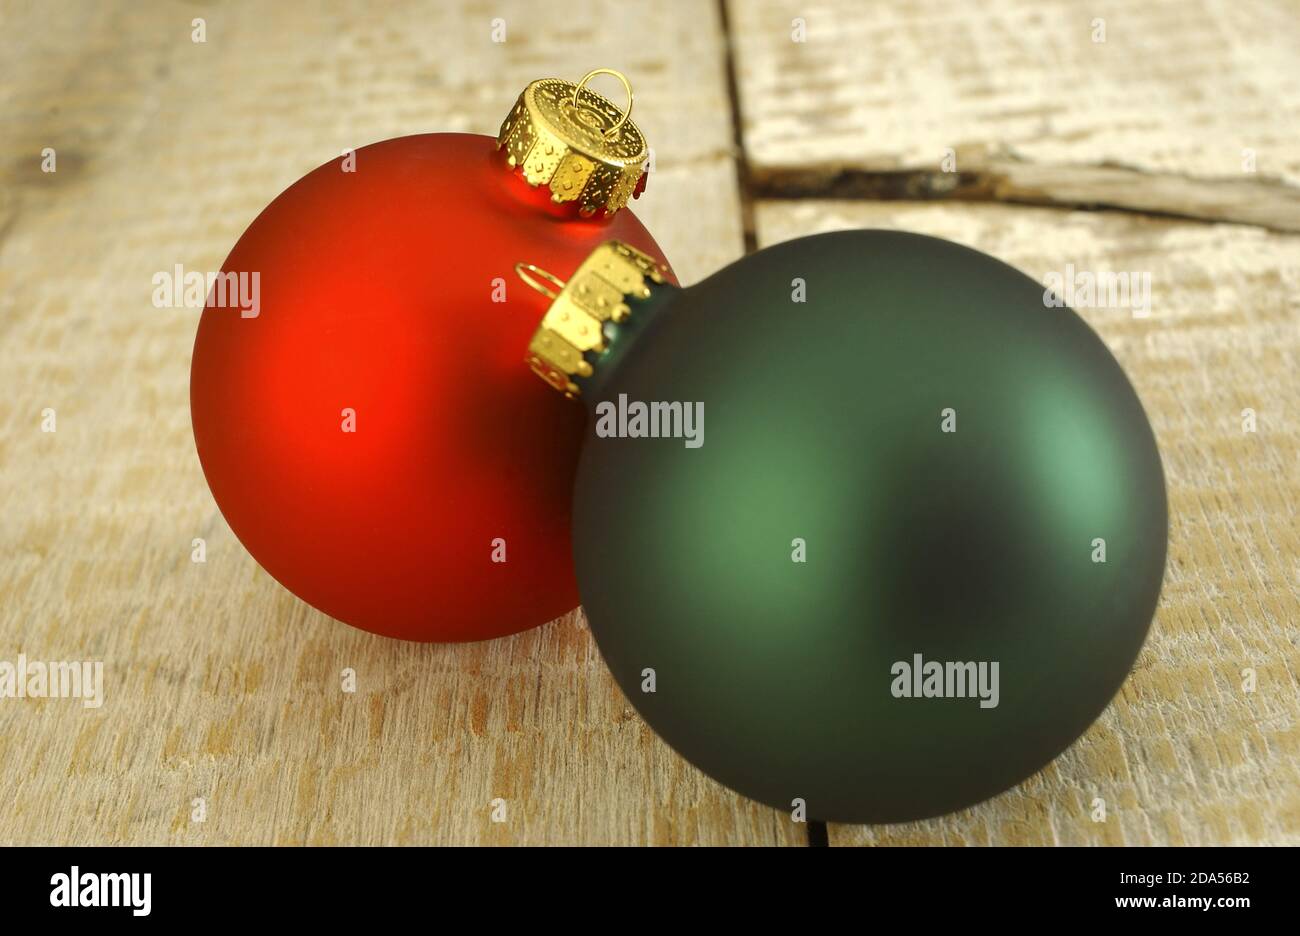 ASSORTMENT OF COLORFUL GLASS CHRISTMAS ORNAMENTS Stock Photo